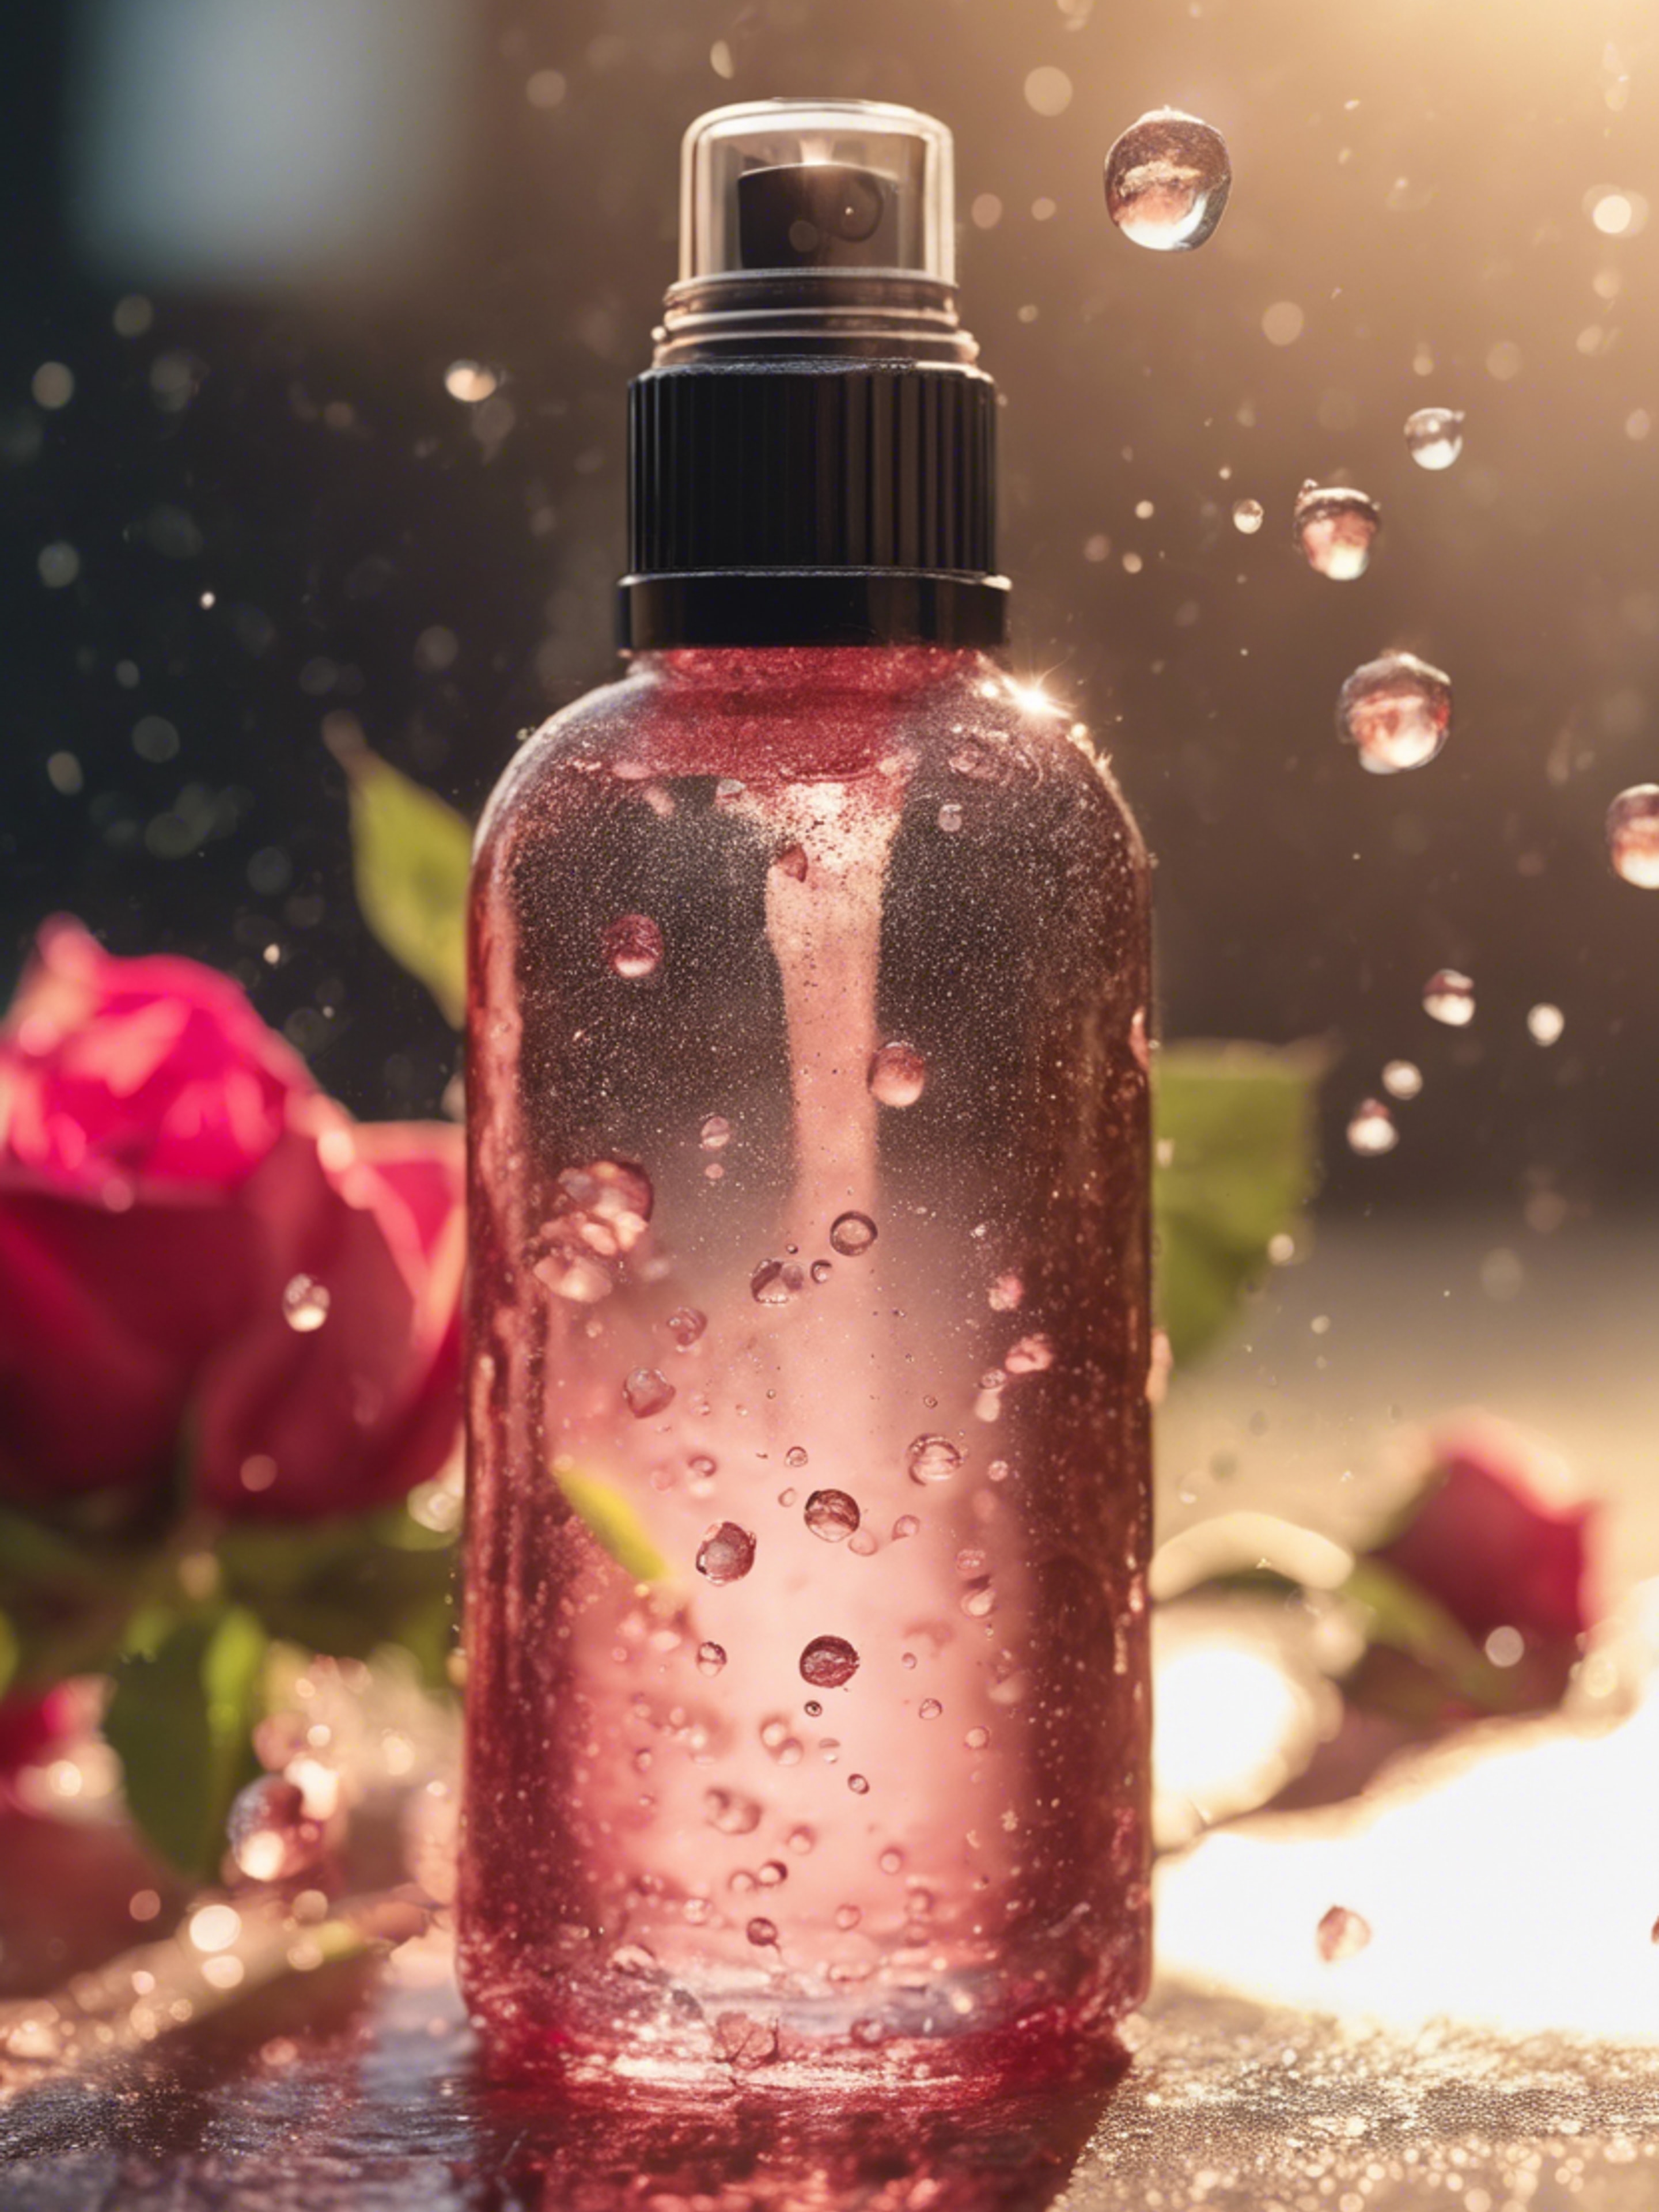 A refreshing spray bottle of rose water toner sprinkling droplets in the sunlight. Taustakuva[f1b2cb92d7c7439692a8]